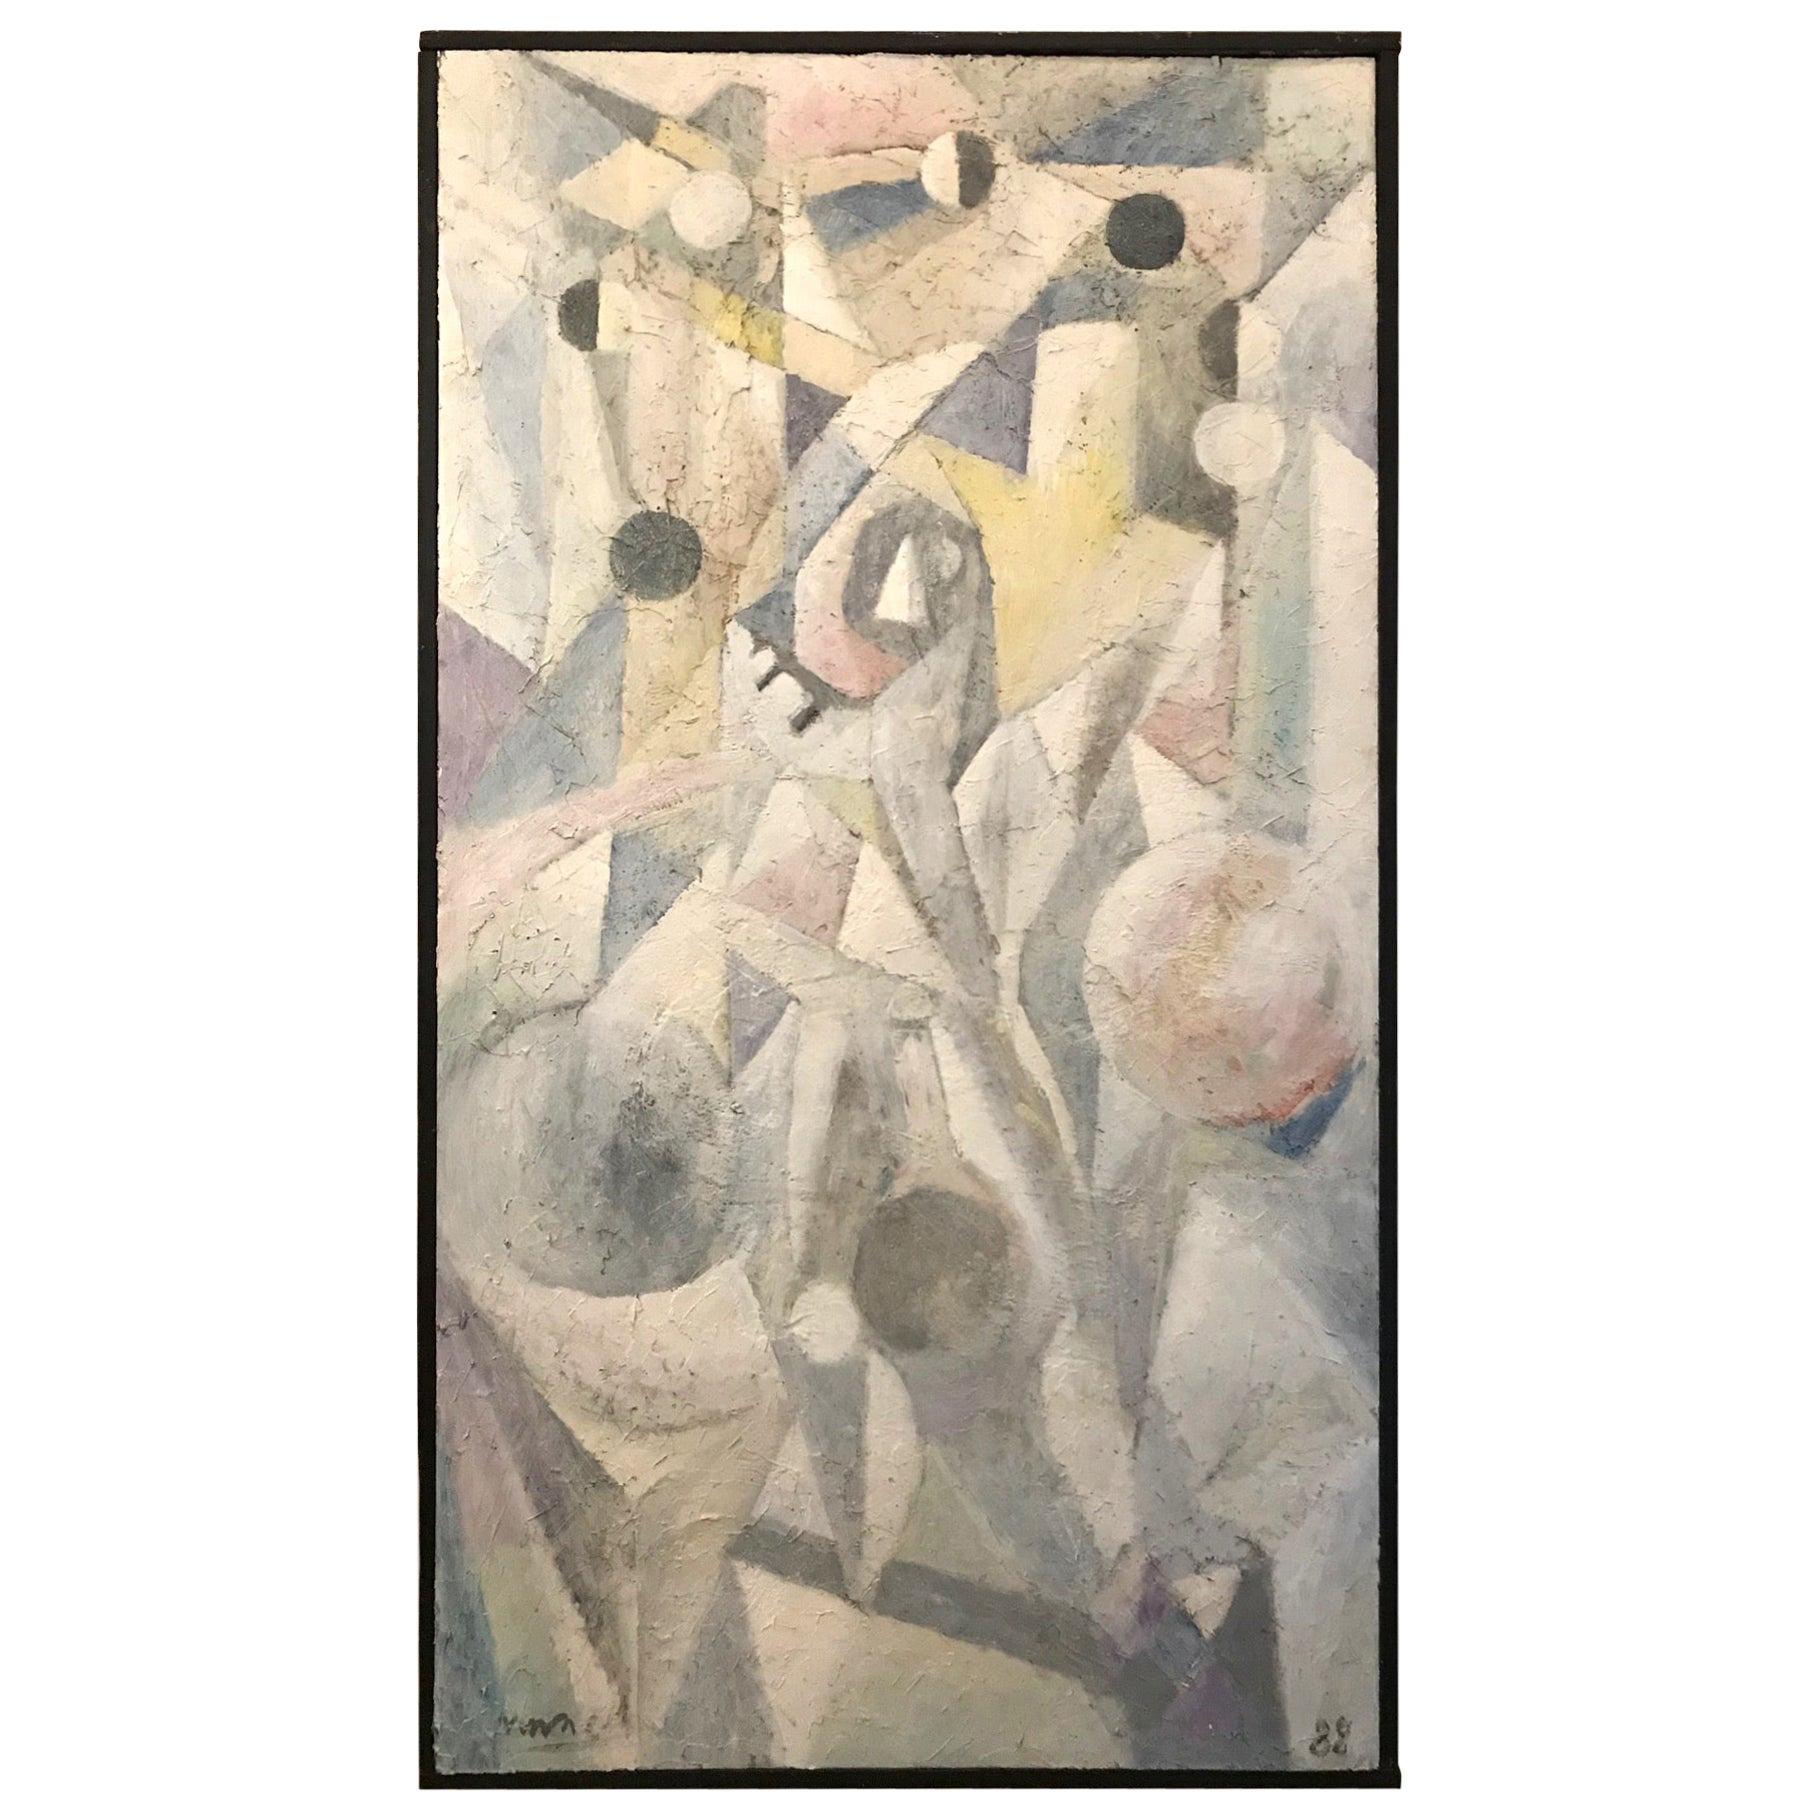 Cubo-Futurism Abstract Painting in Pastel Colors, Fresco on Board, c. 1988 For Sale